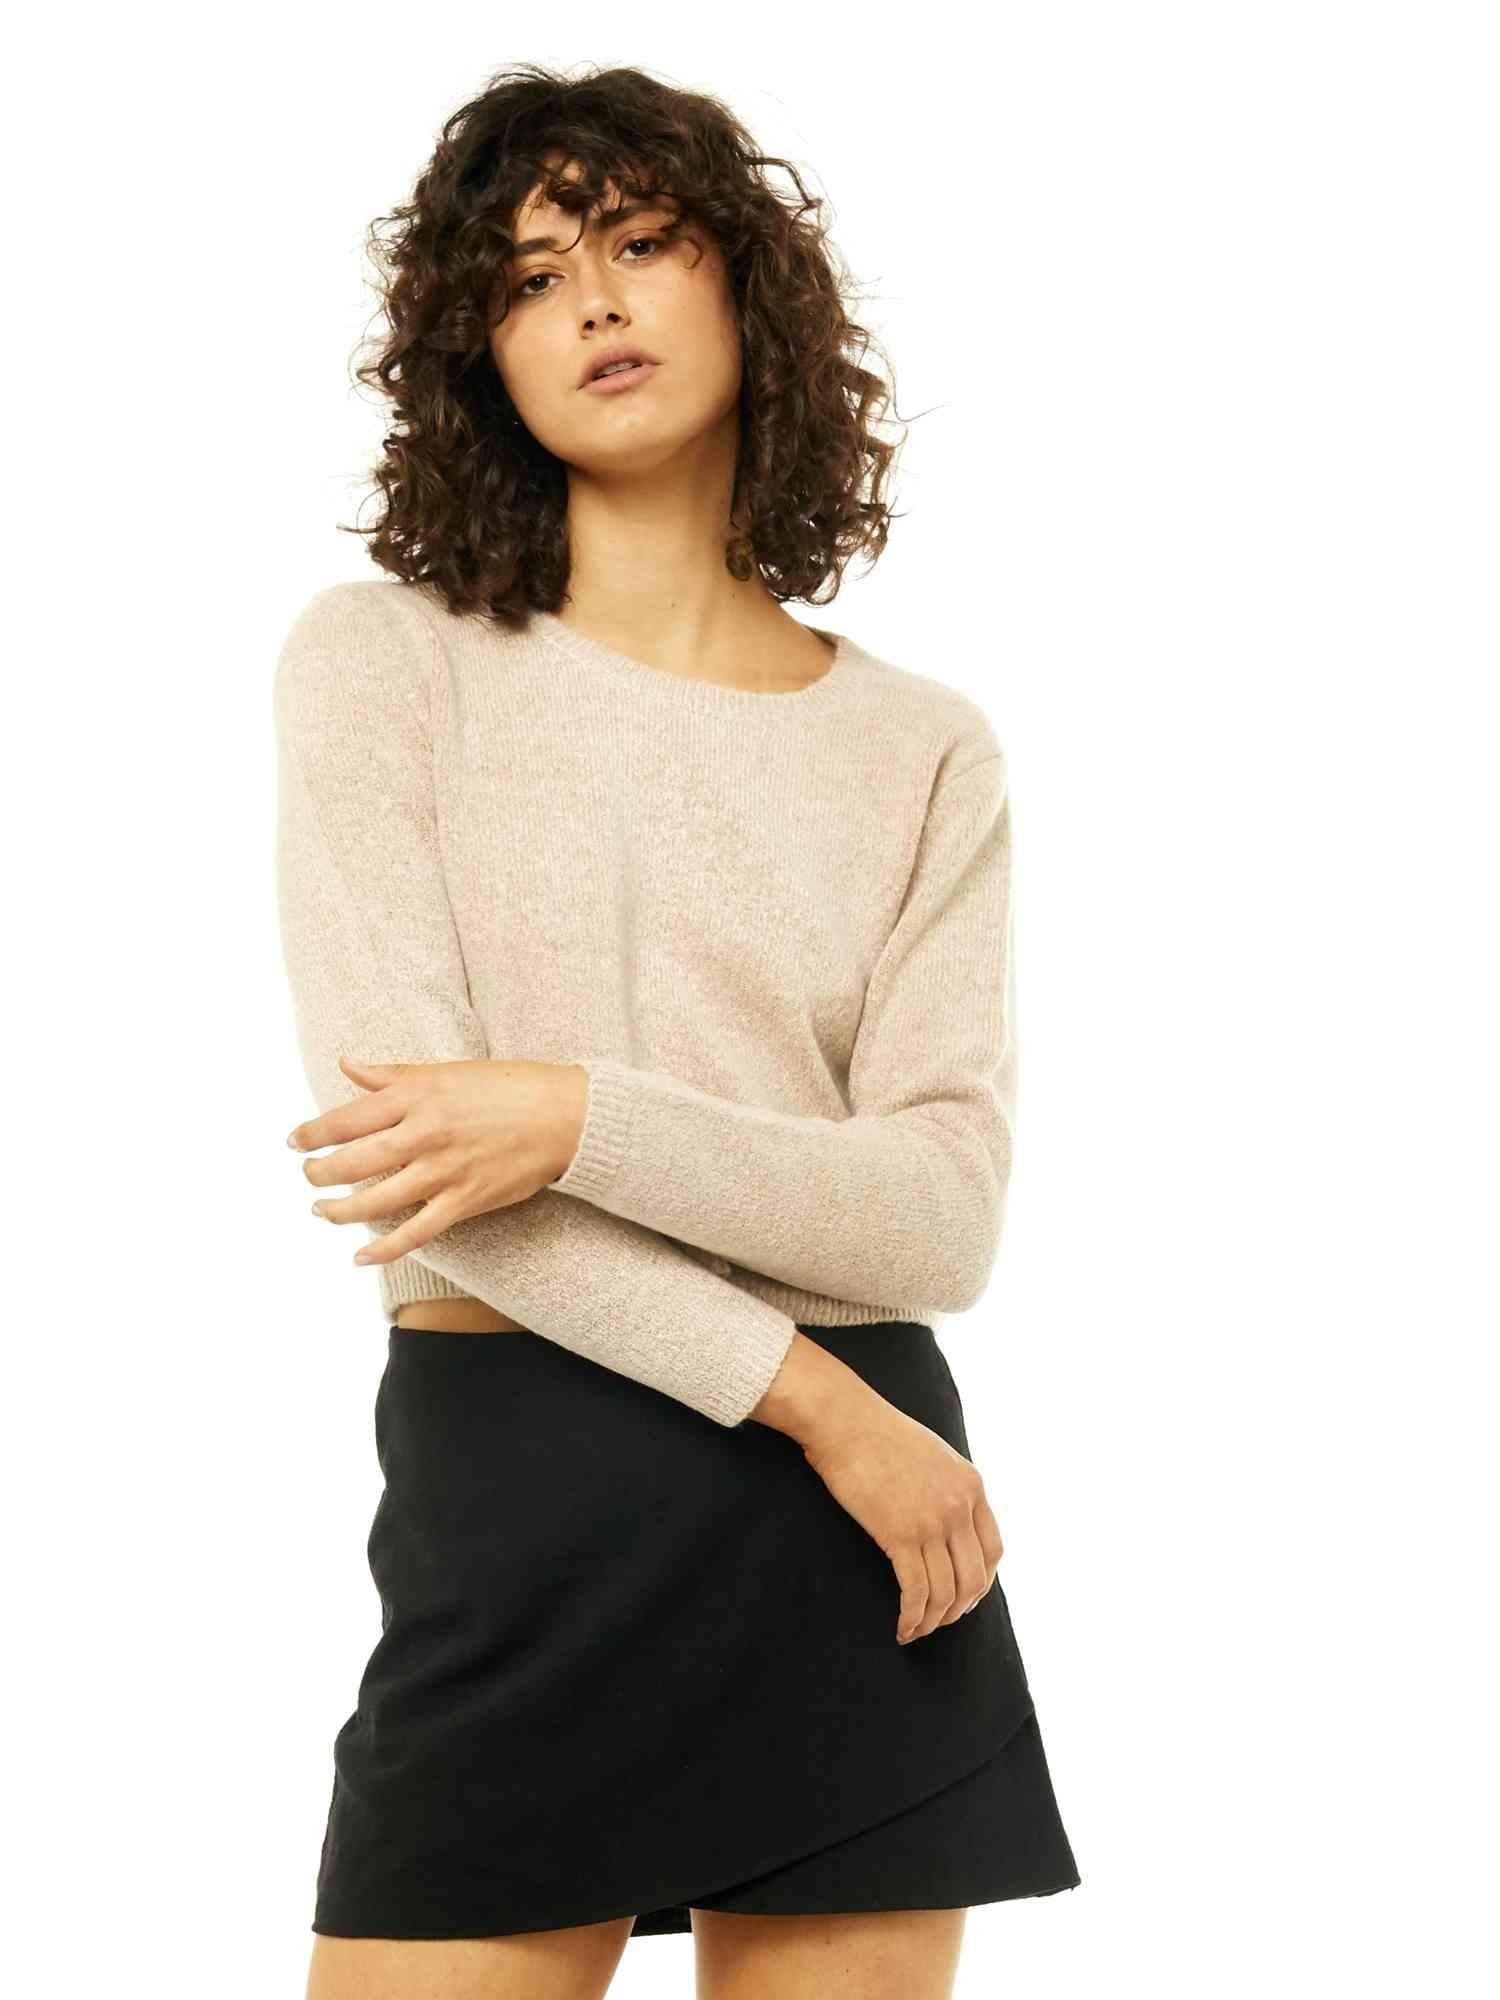 Rusty Together Crew Neck Knit - Sable Rusty Australia, L / Sable